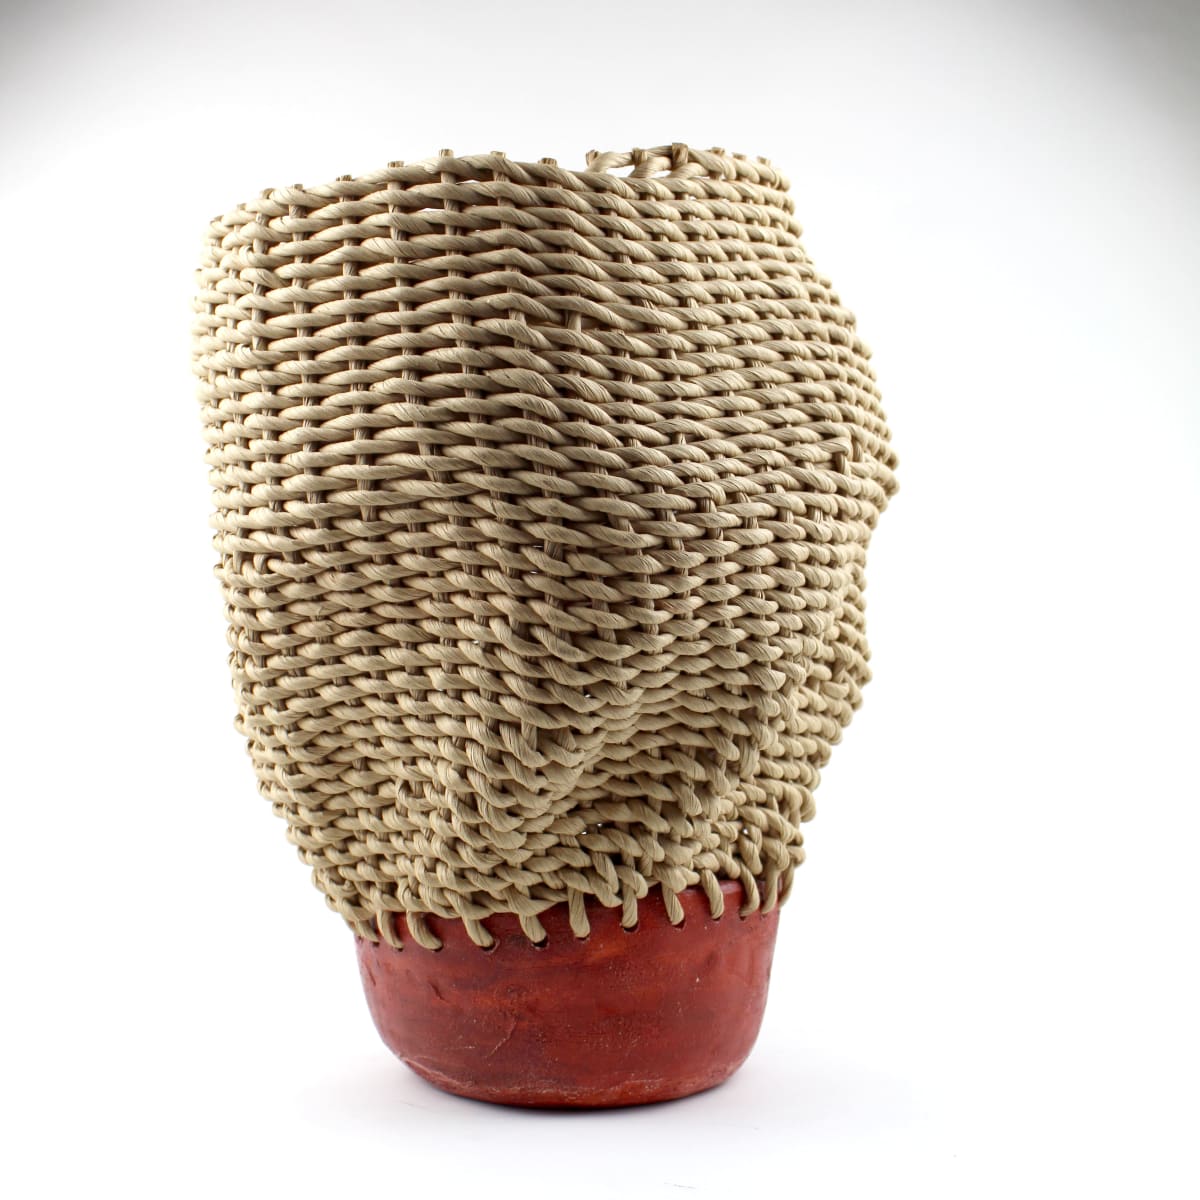 Basketpot VII by Essa Baird  Image: A collection of hand built ceramic bottoms paired with basket weaving technique tops. Using different weaving types + materials such as fiber rush, yarn, and twine.